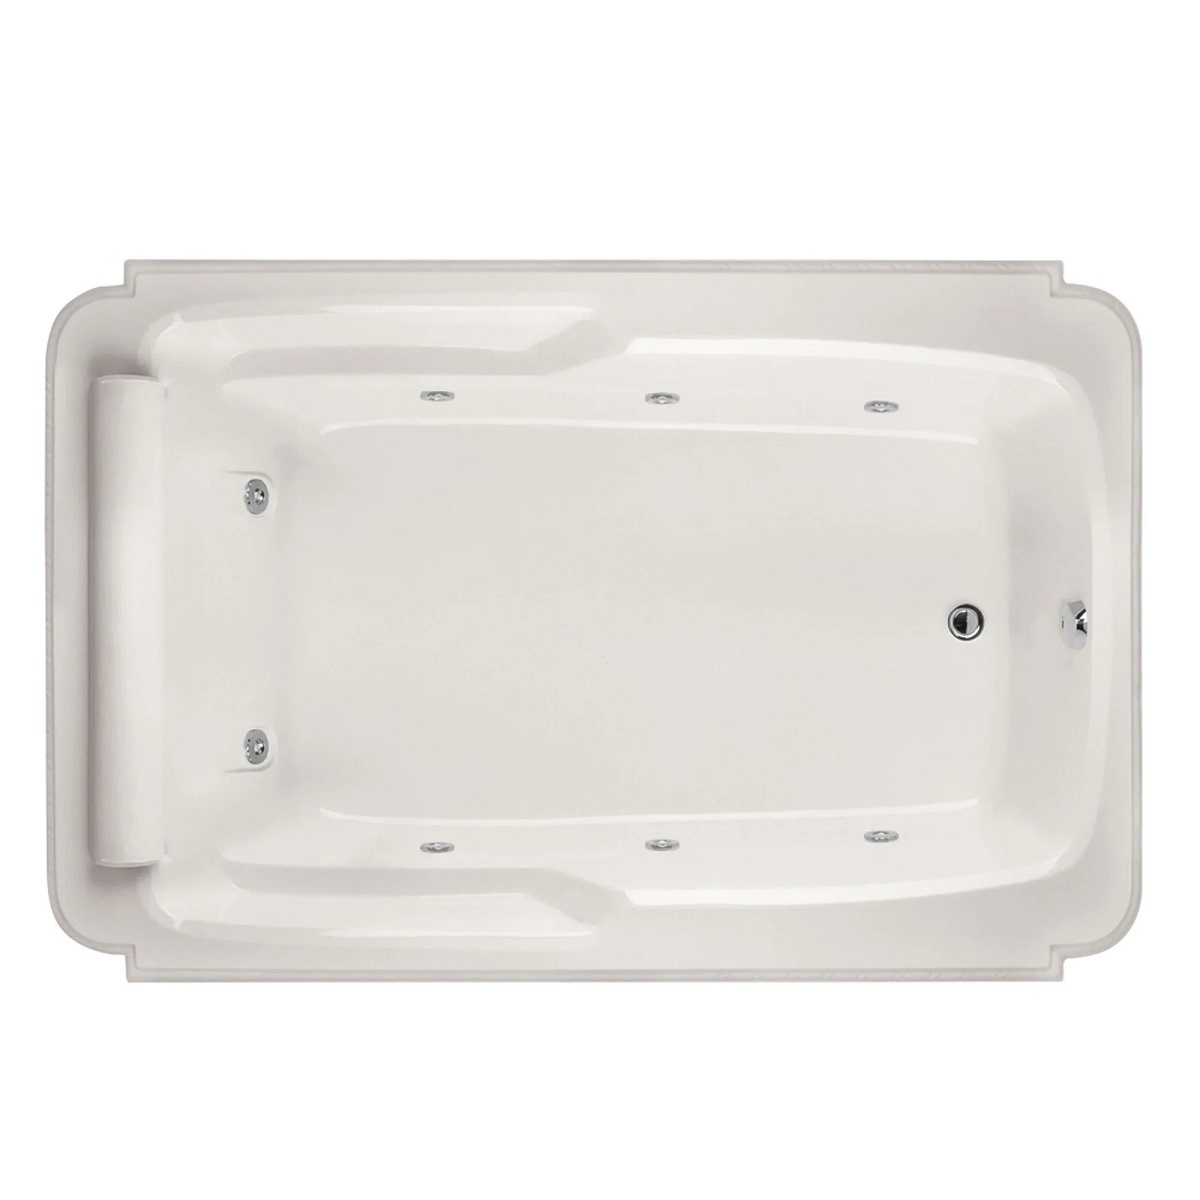 HYDRO SYSTEMS ATL7448AWP DESIGNER COLLECTION ATLANDIA 74 X 48 INCH ACRYLIC DROP-IN BATHTUB WITH WHIRLPOOL SYSTEM